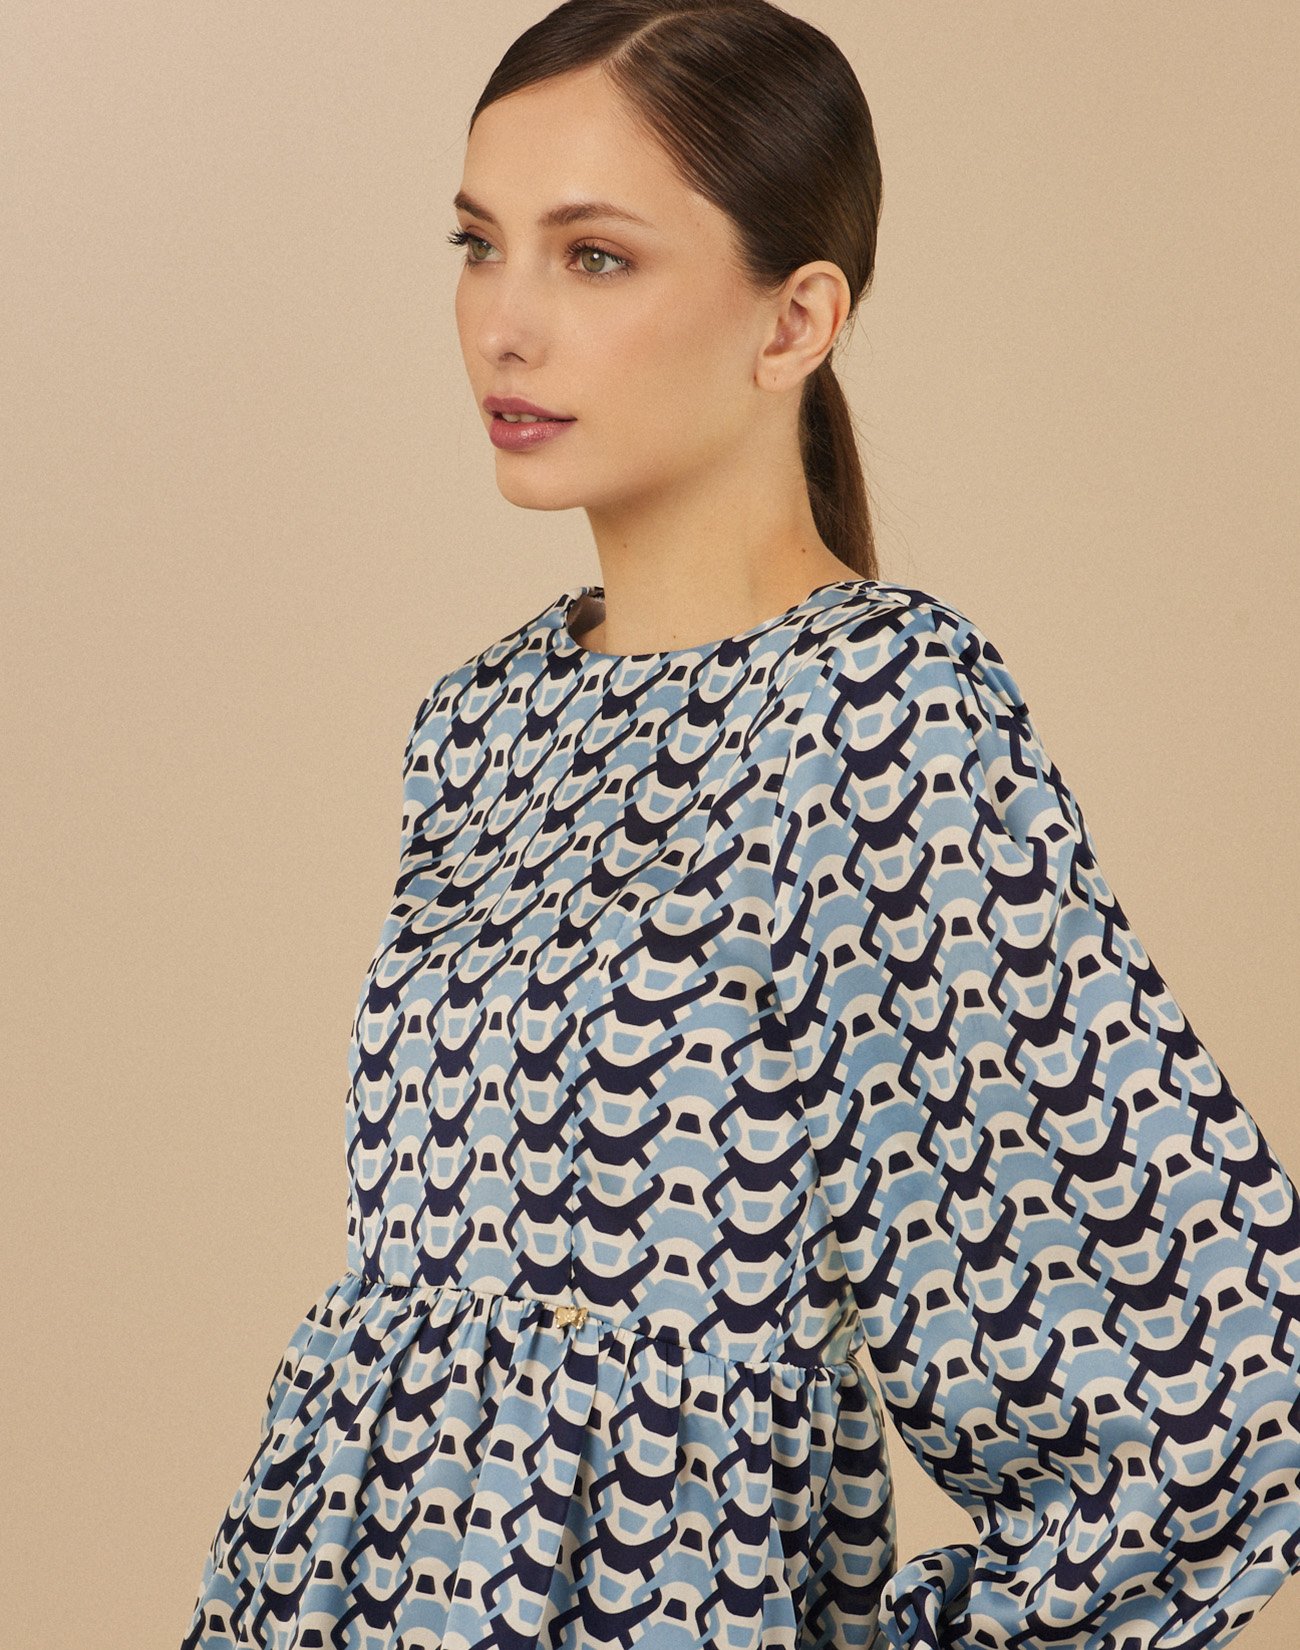 Printed blouse with pads